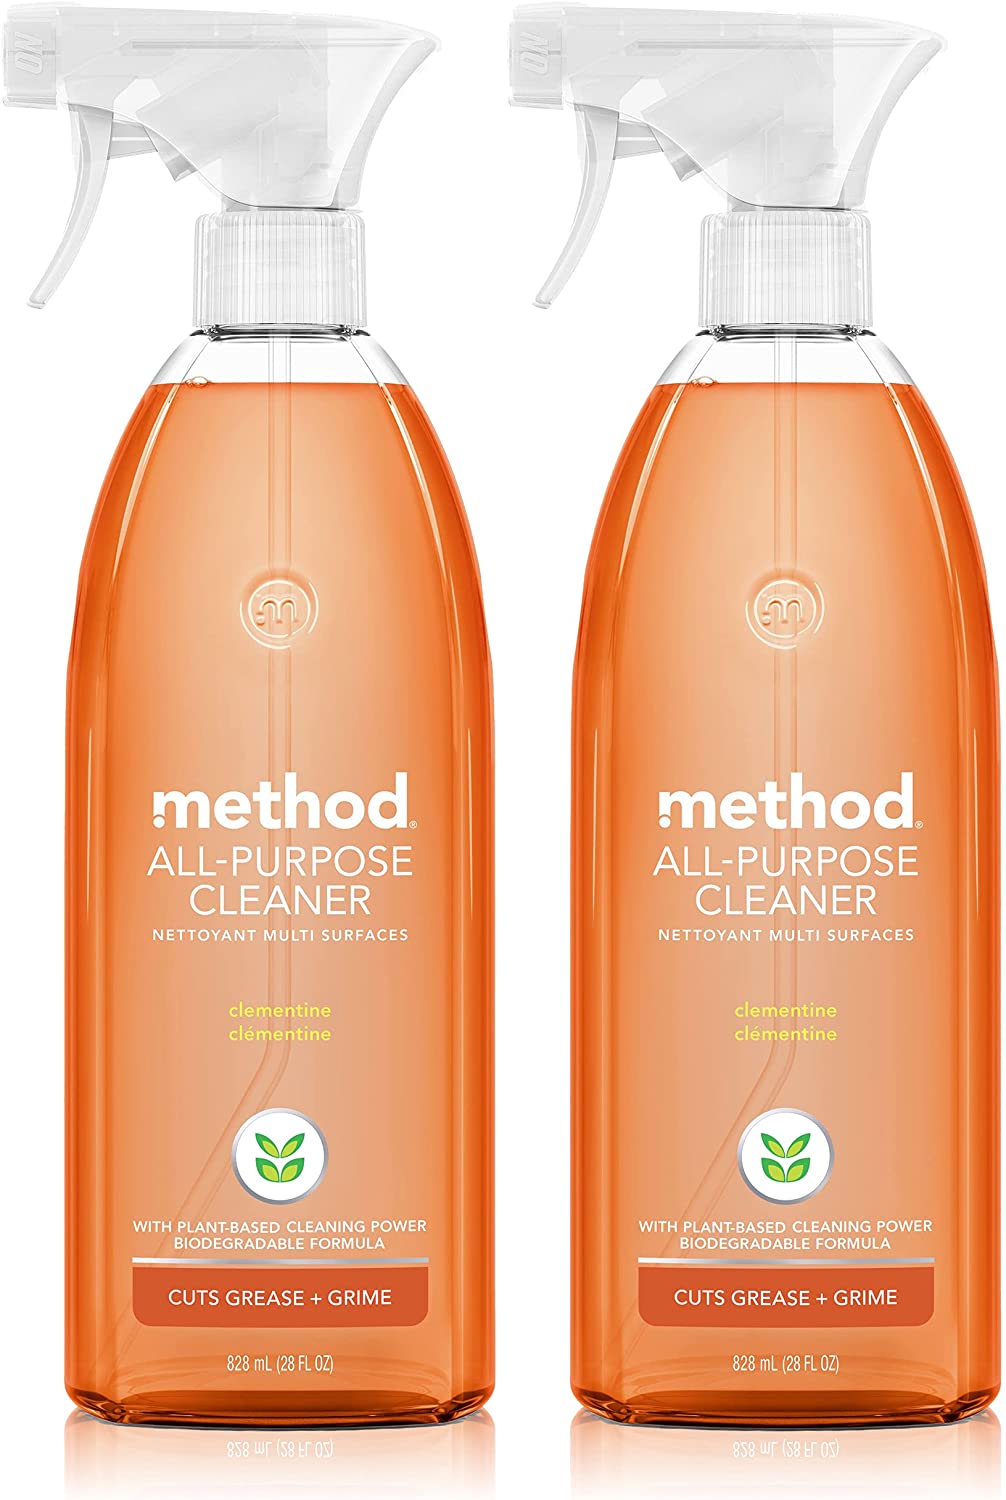 Method All-Purpose Cleaner Spray, Plant-Based and Biodegradable Formula Perfect for Most Counters, Tiles, Stone, and More, Clementine Scent, 828 ml Spray Bottles, 2 Pack, Packaging May Vary